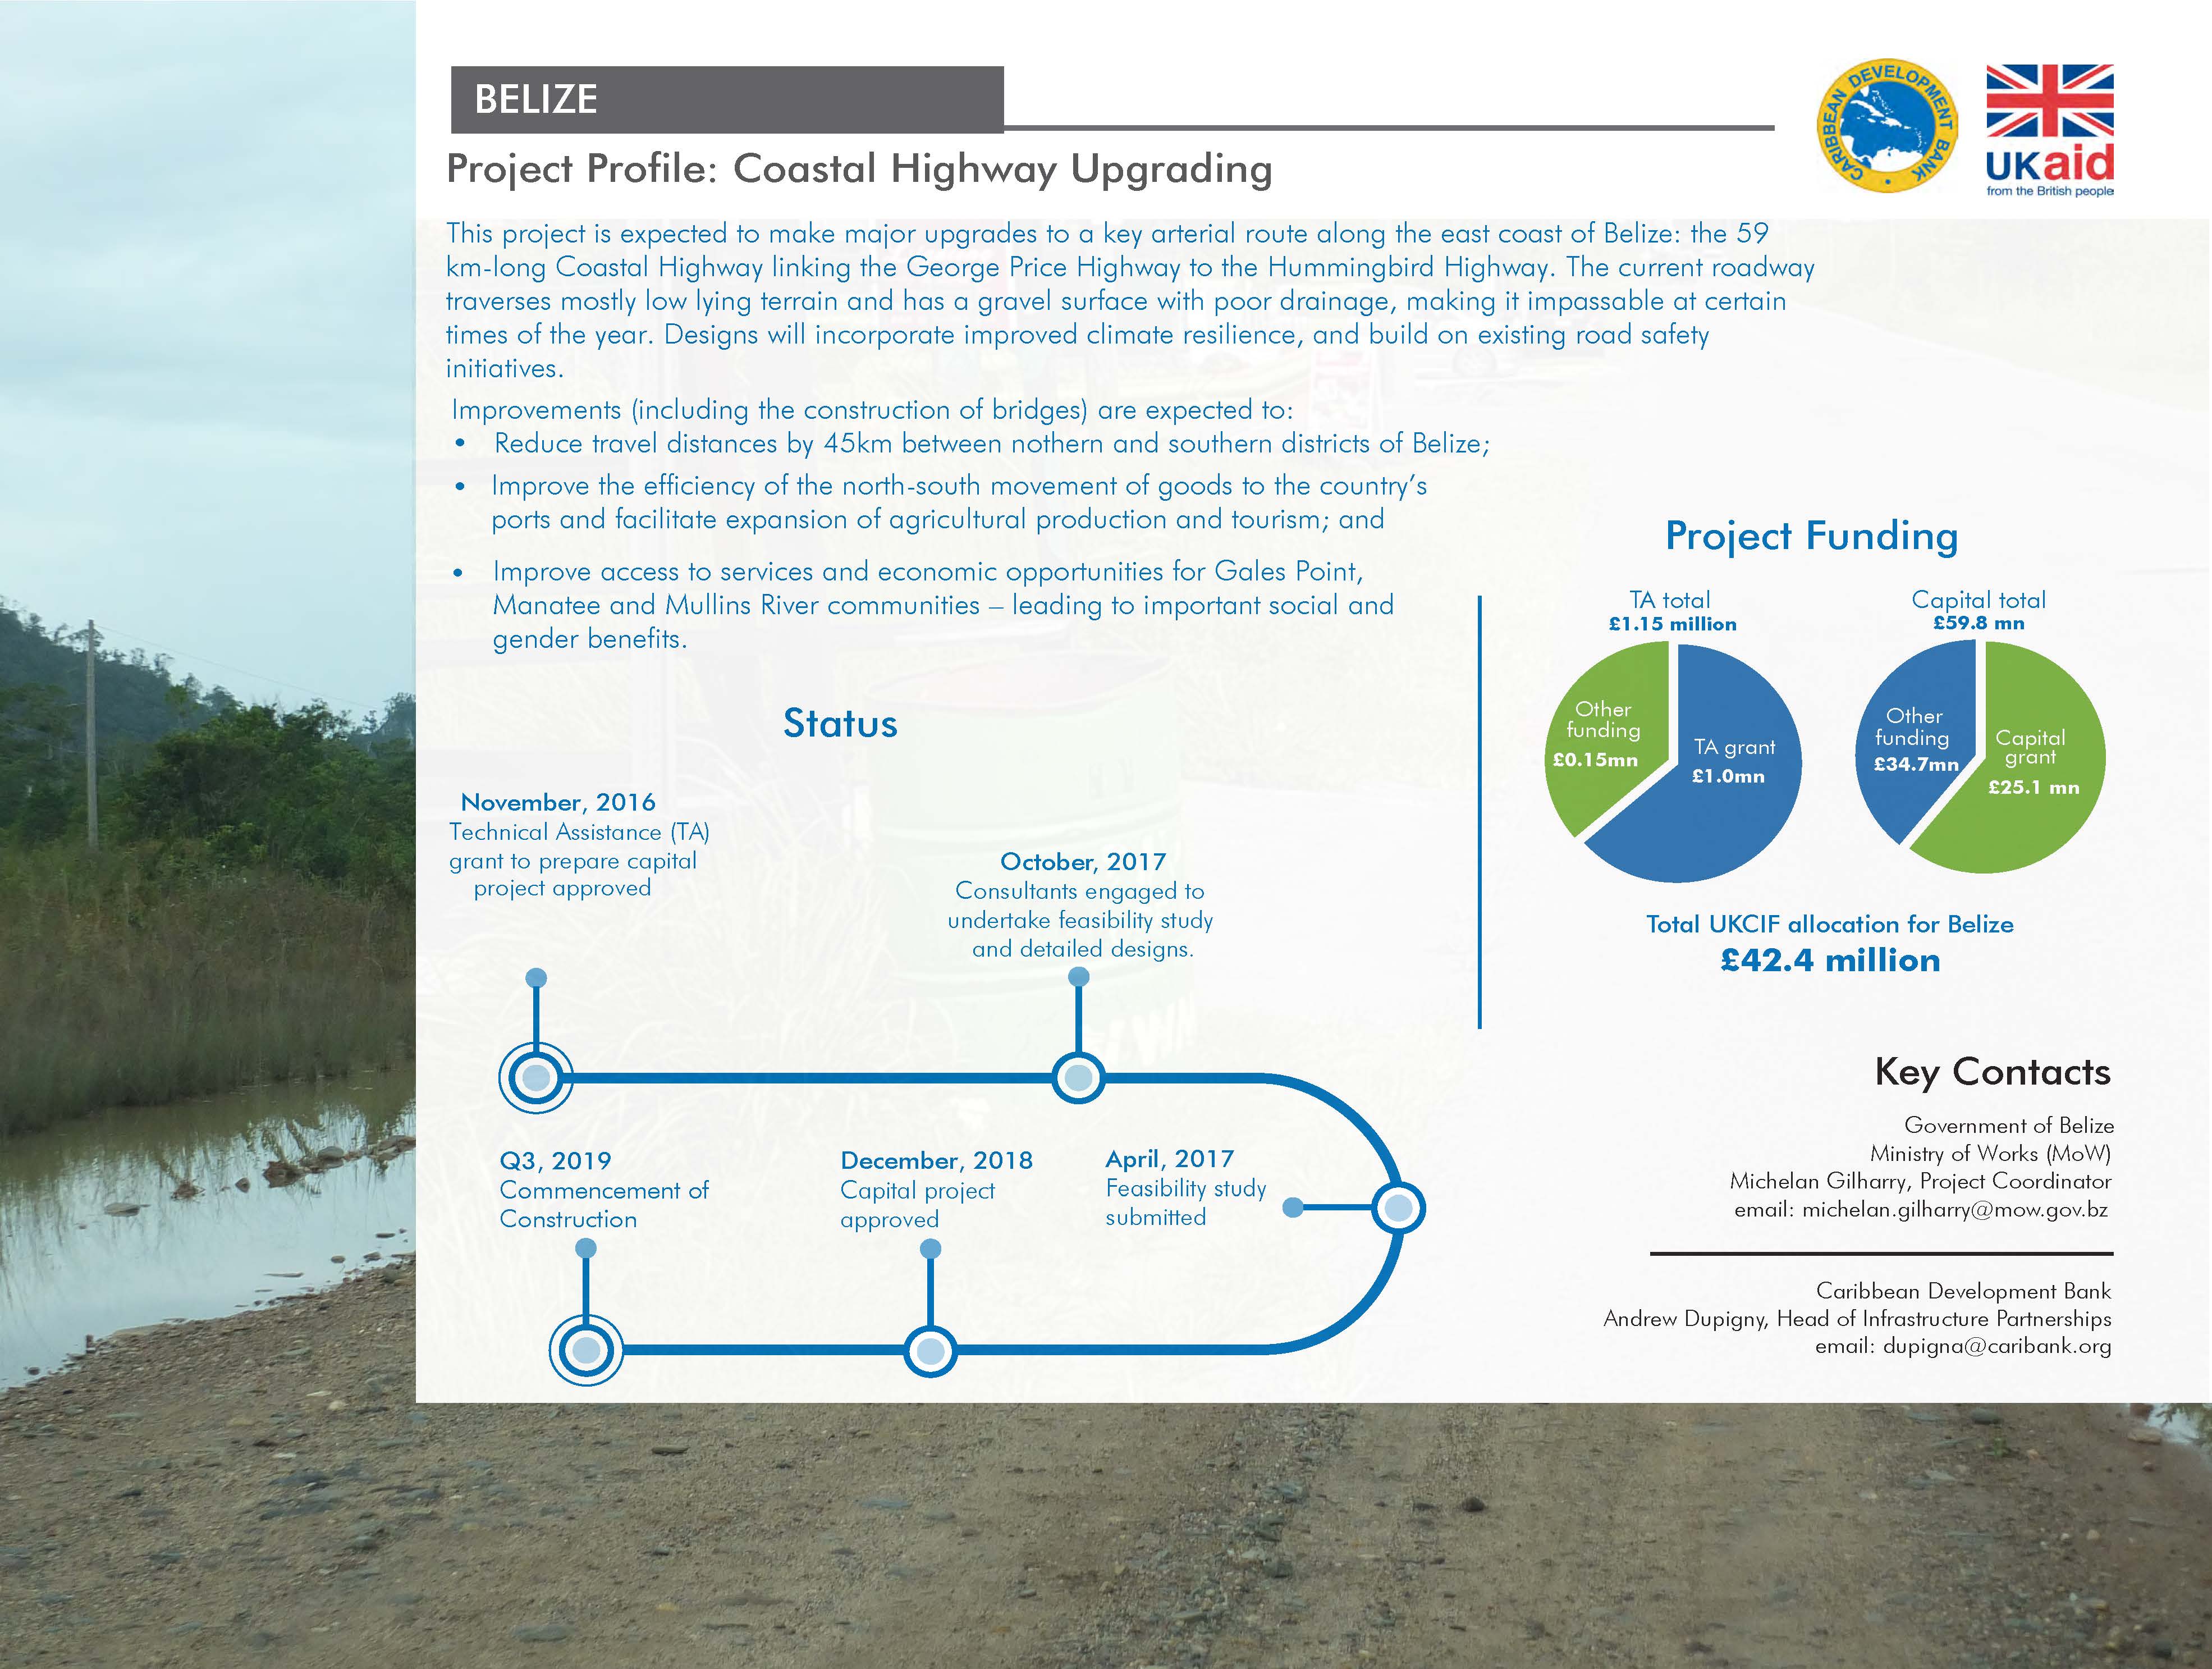 project profile with background image of a dirt road with text and charts against white backdrop